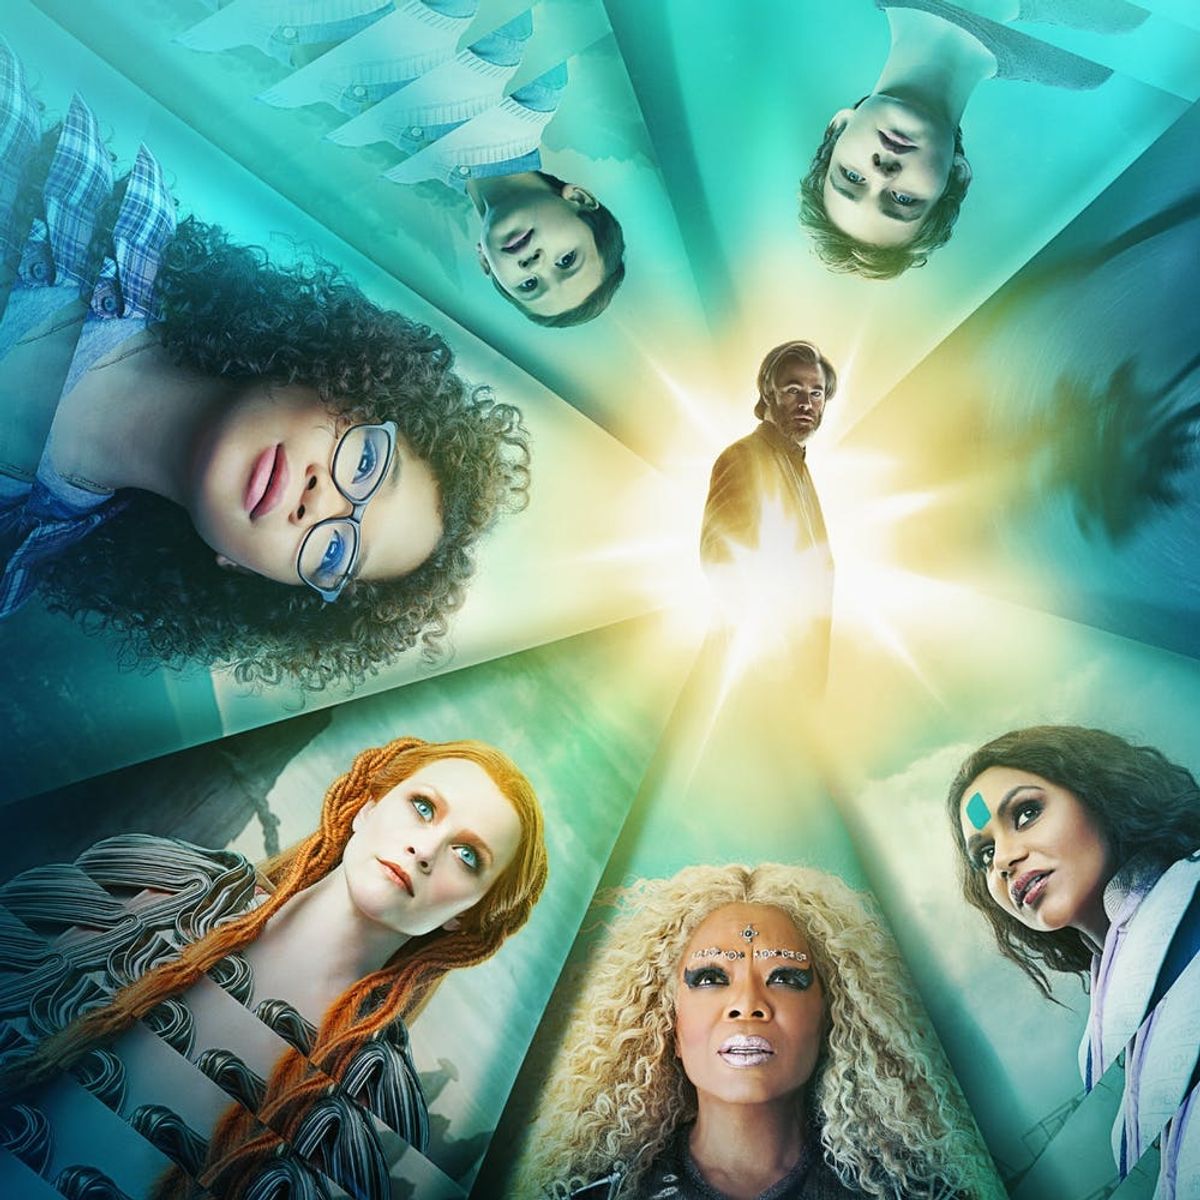 This Teen Is Raising Money to Send 1,000 Girls to See “A Wrinkle in Time”